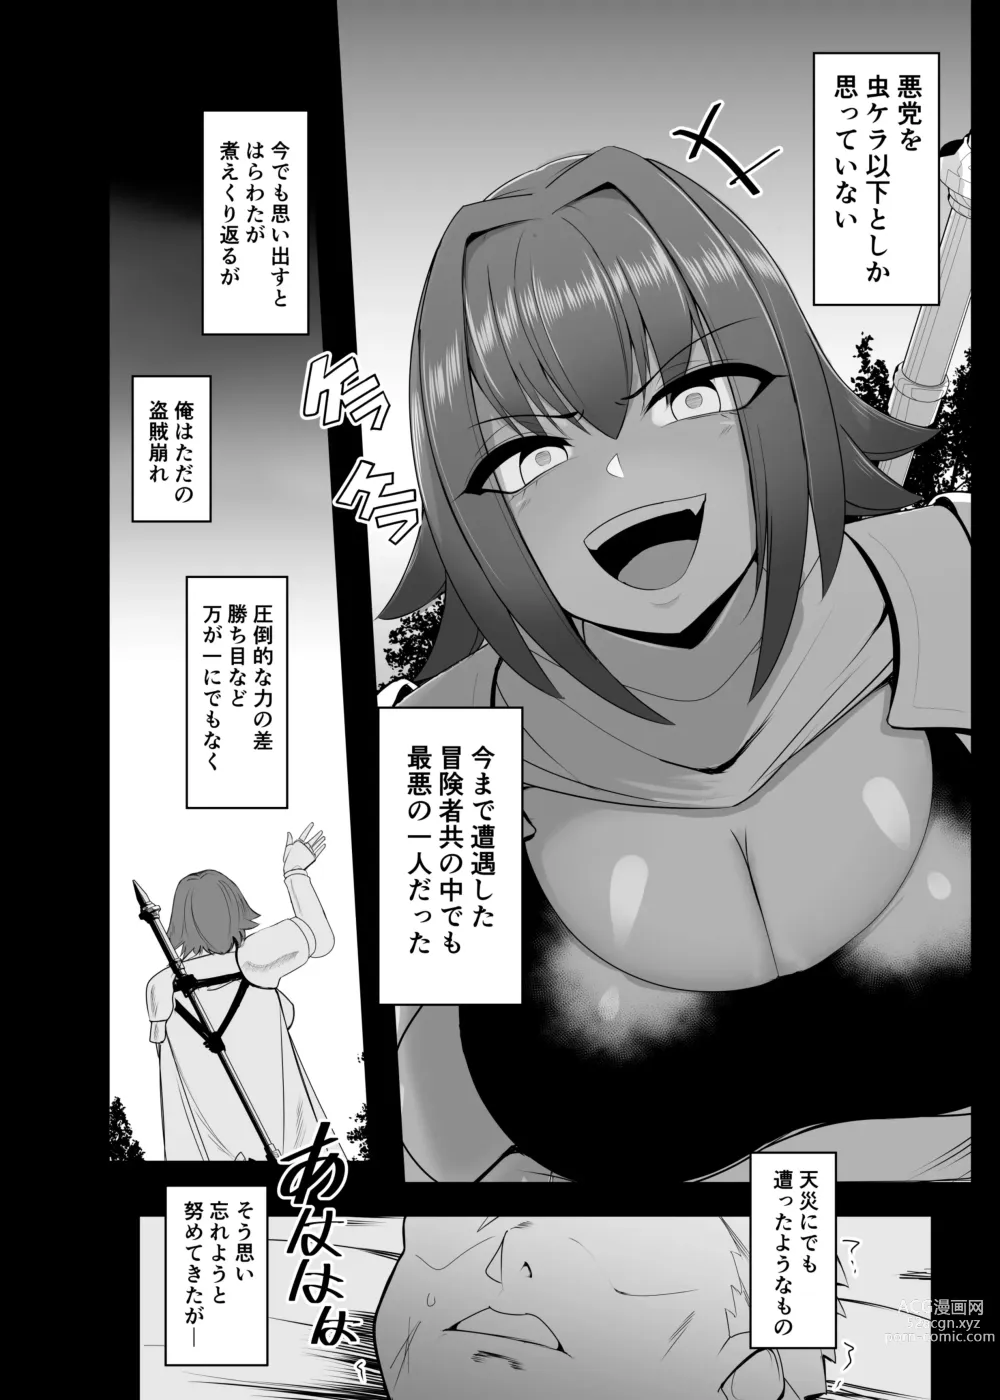 Page 5 of doujinshi Doll Turning Collar - Female Warrior